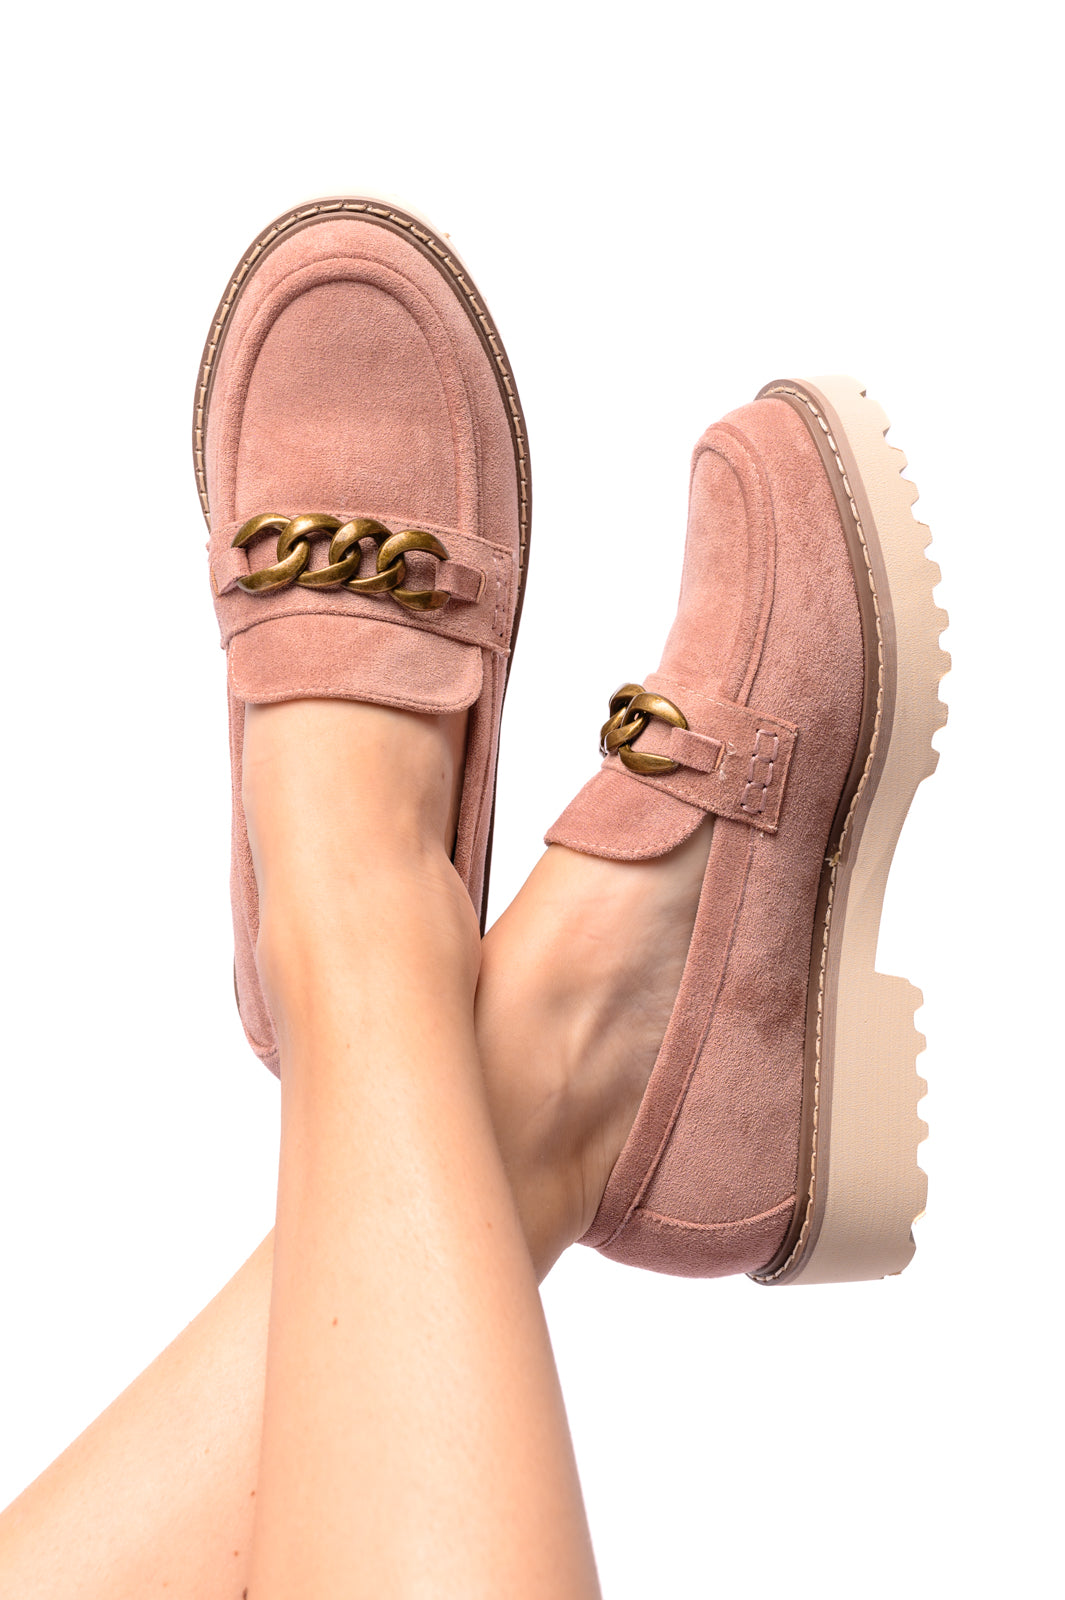 Literally Loafers in Blush Faux Suede